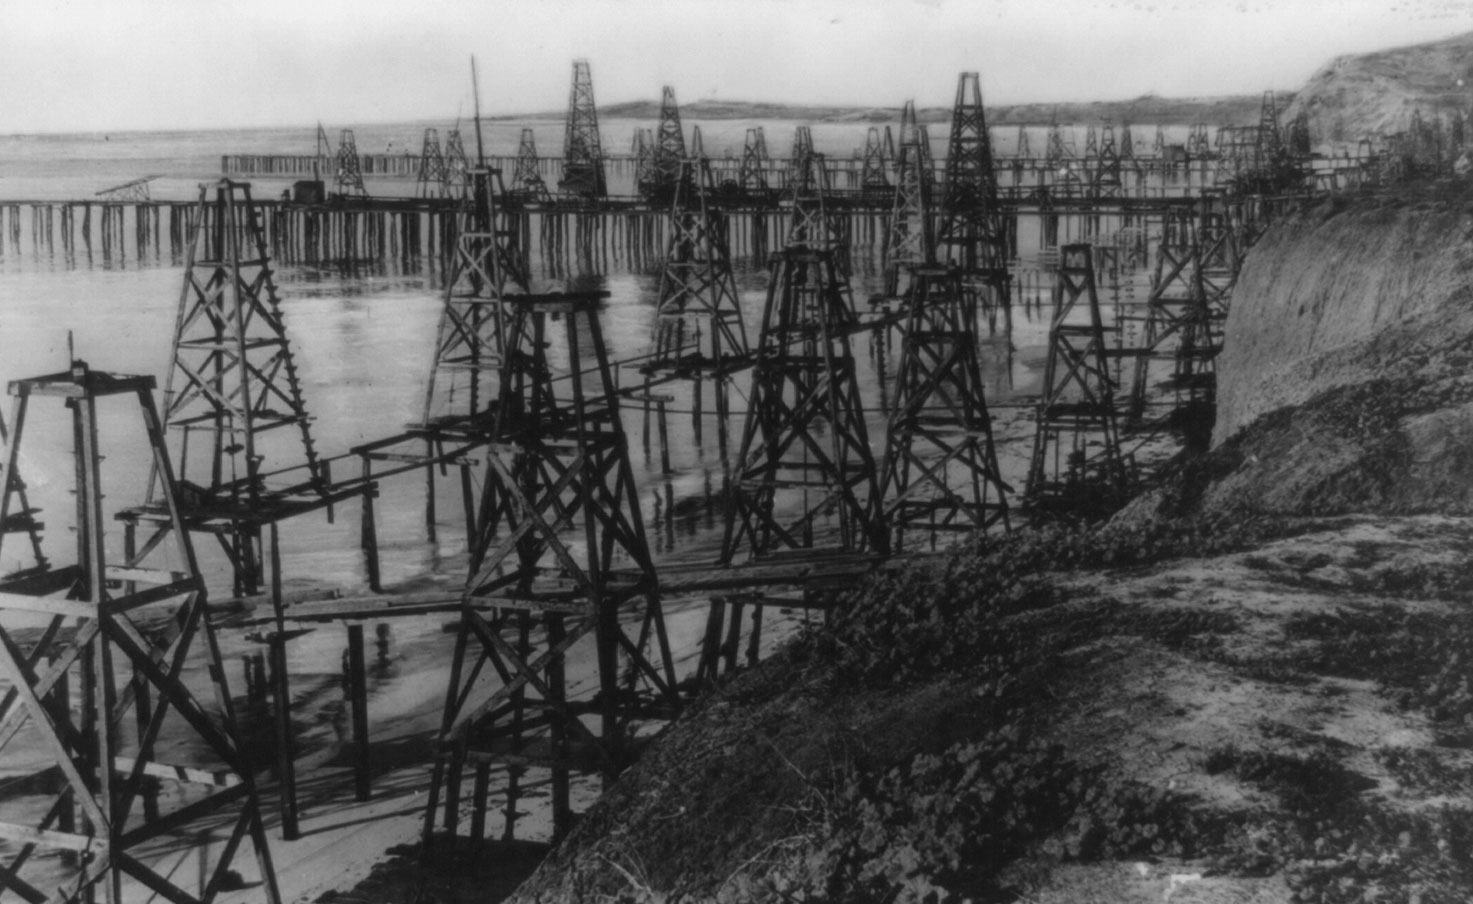 Black and white photograph showing numerous oil derricks on the coast and in the water in Summerfield, Long Beach, California, ca. 1920.